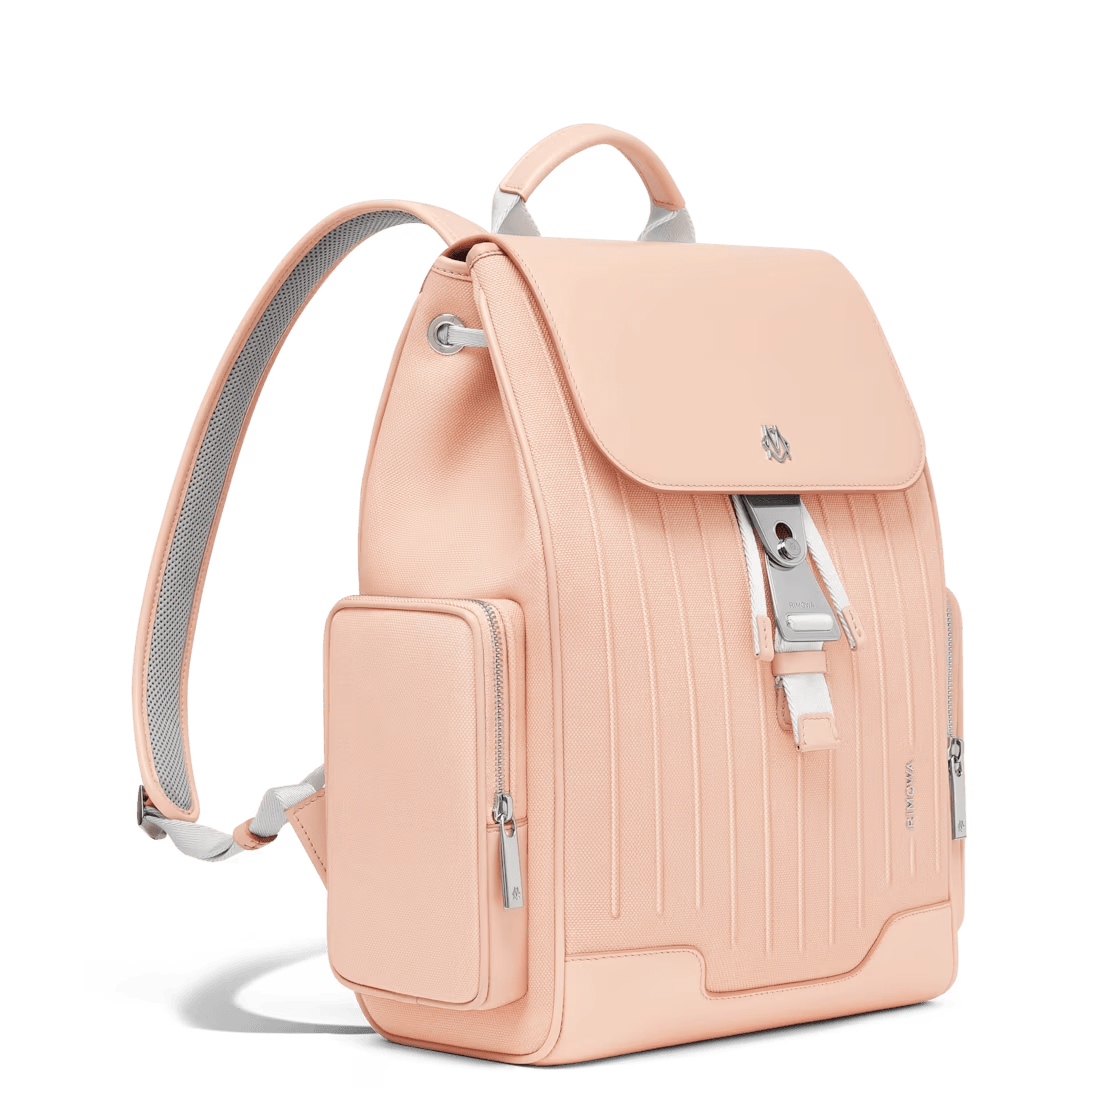 Flap Backpack Small (Pink)